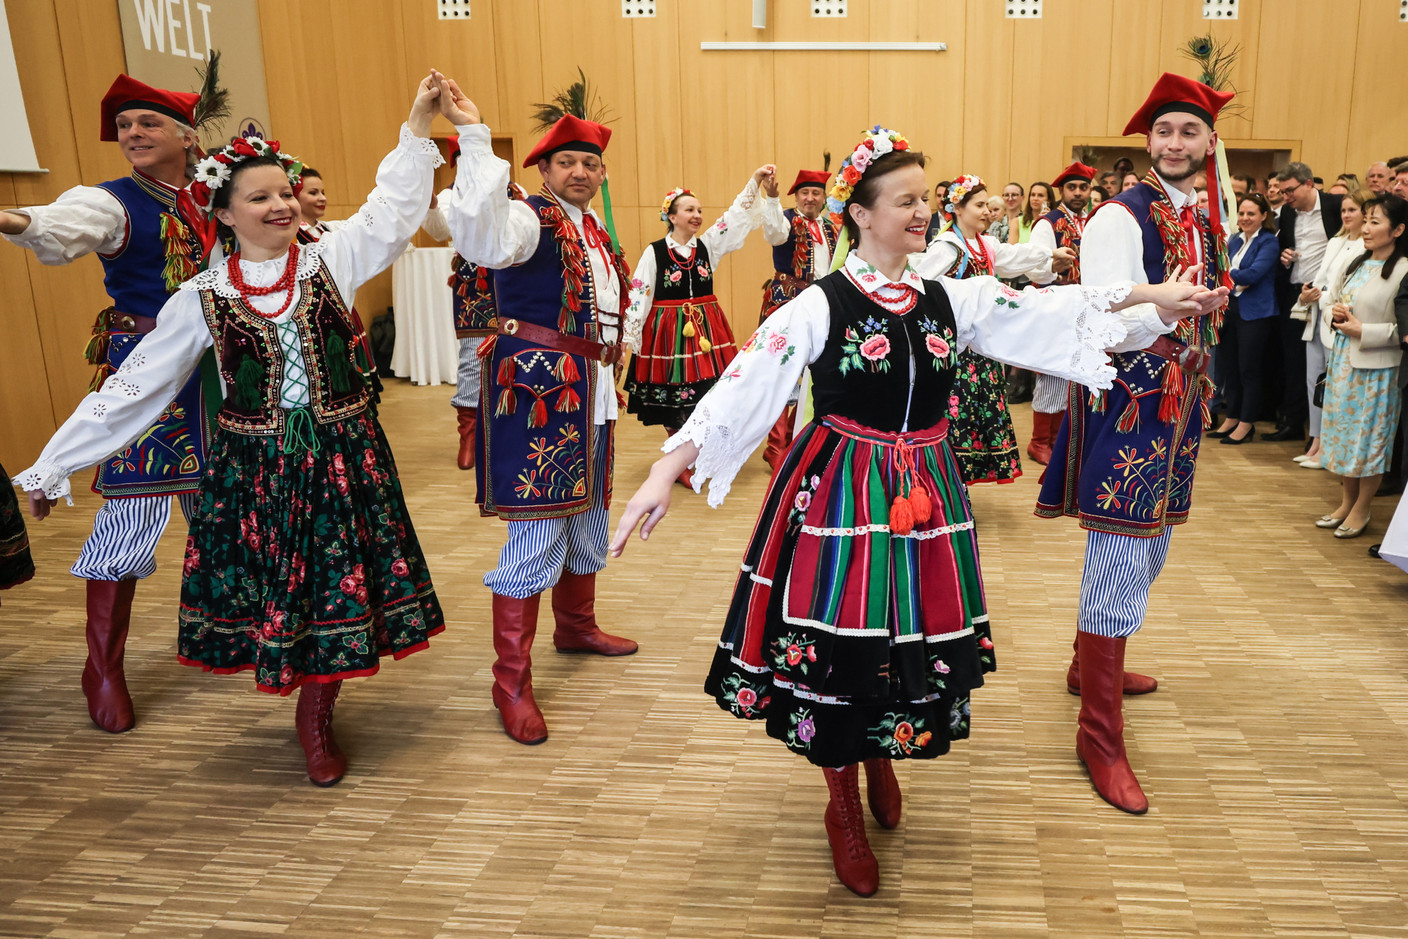 Dancers dressed in traditional Polish outfits at the 3rd May Constitution Day event. Photo: Guy Wolff/Maison Moderne